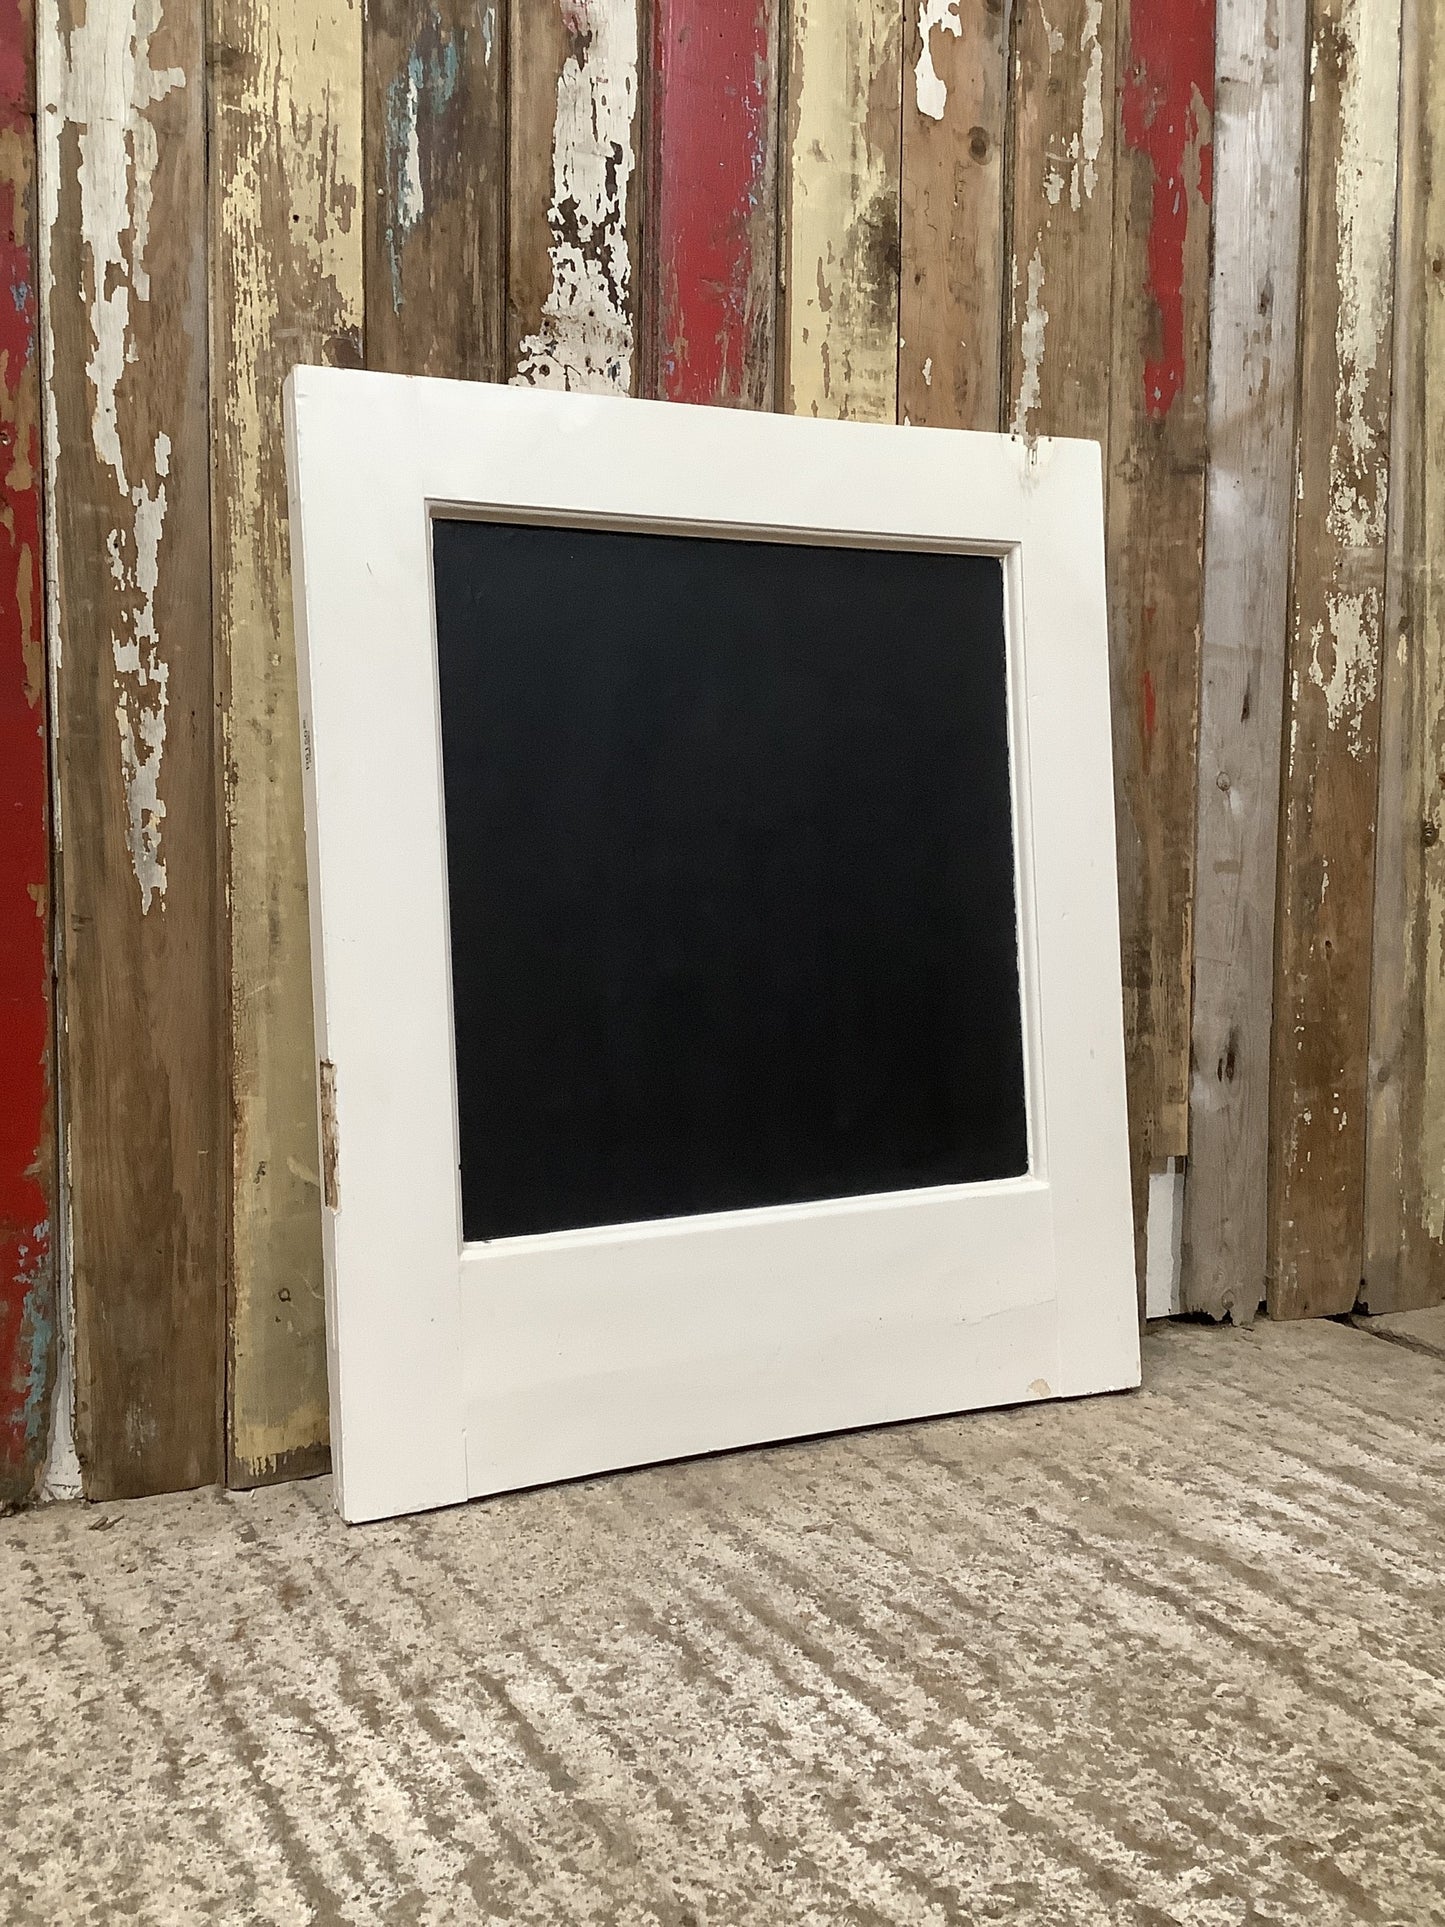 Interesting White Doubled Sided White Panel Blackboard Noticeboard 2'7"H 2'2" W